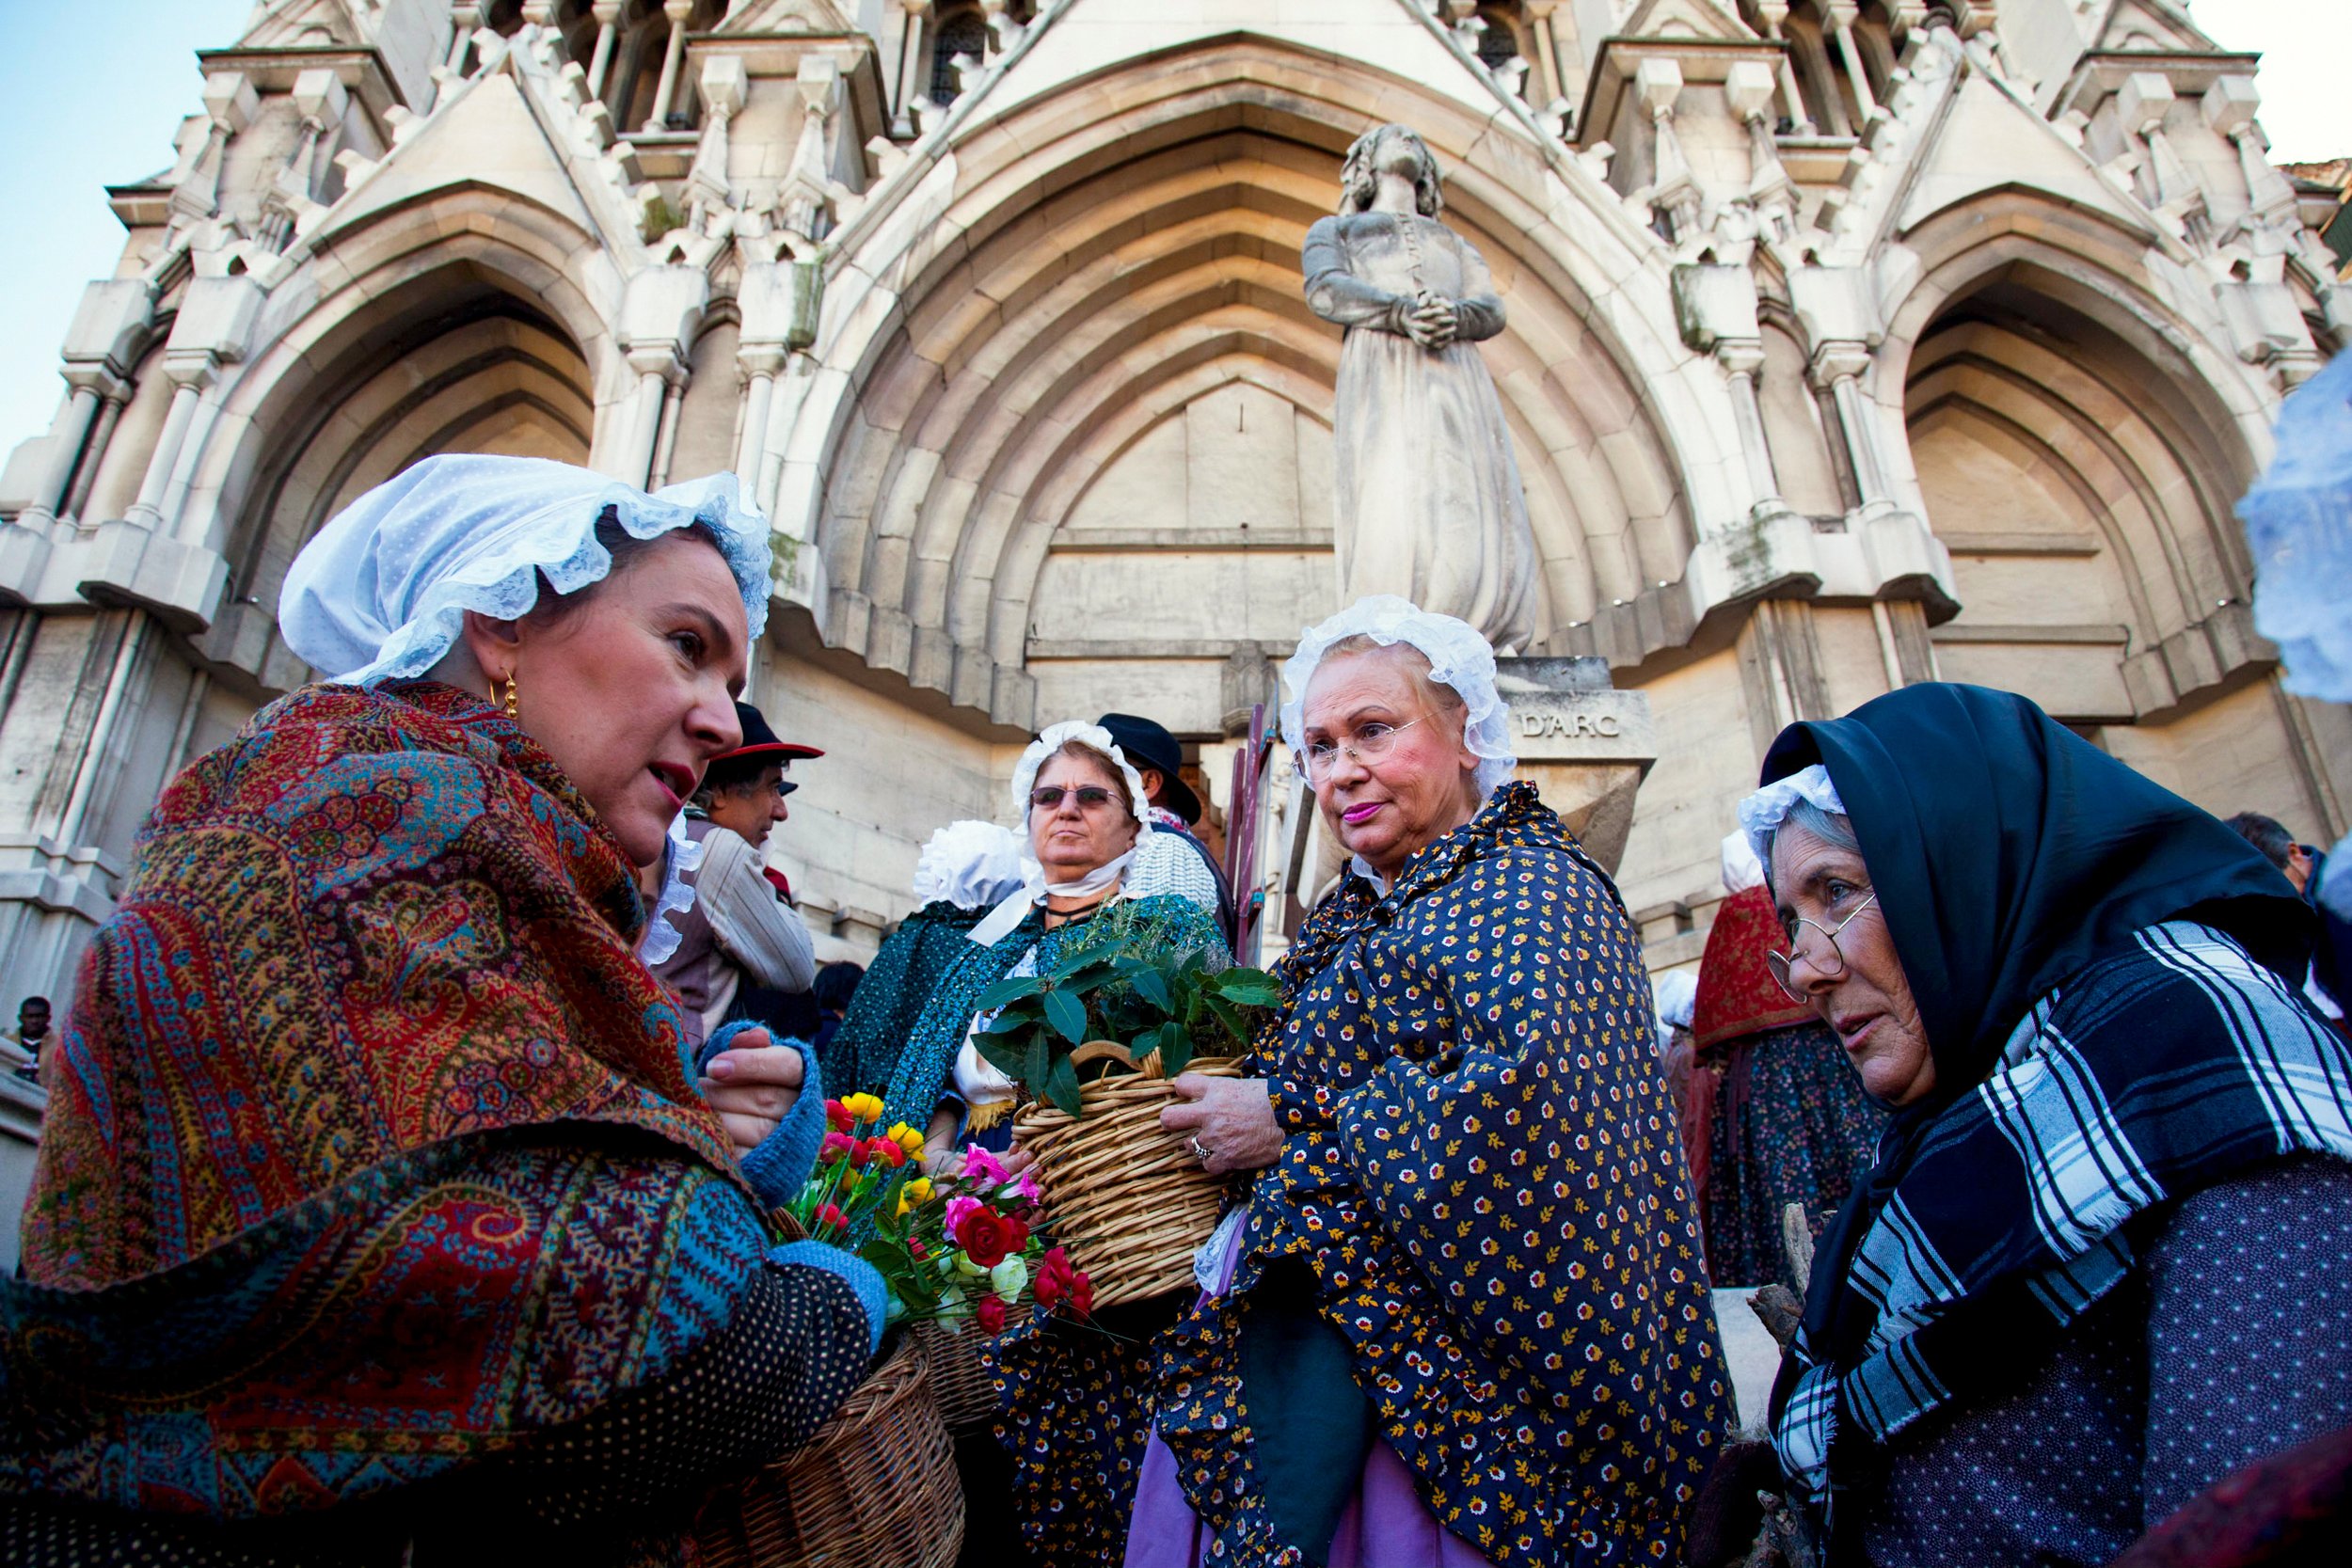  Celebrants gather at Sunday mass at St. Vincent De Paul Reformers Church, to celebrate the Santon Festival, which is a traditional beginning to the Christmas season in Marseille, France on Nov. 21, 2010. 